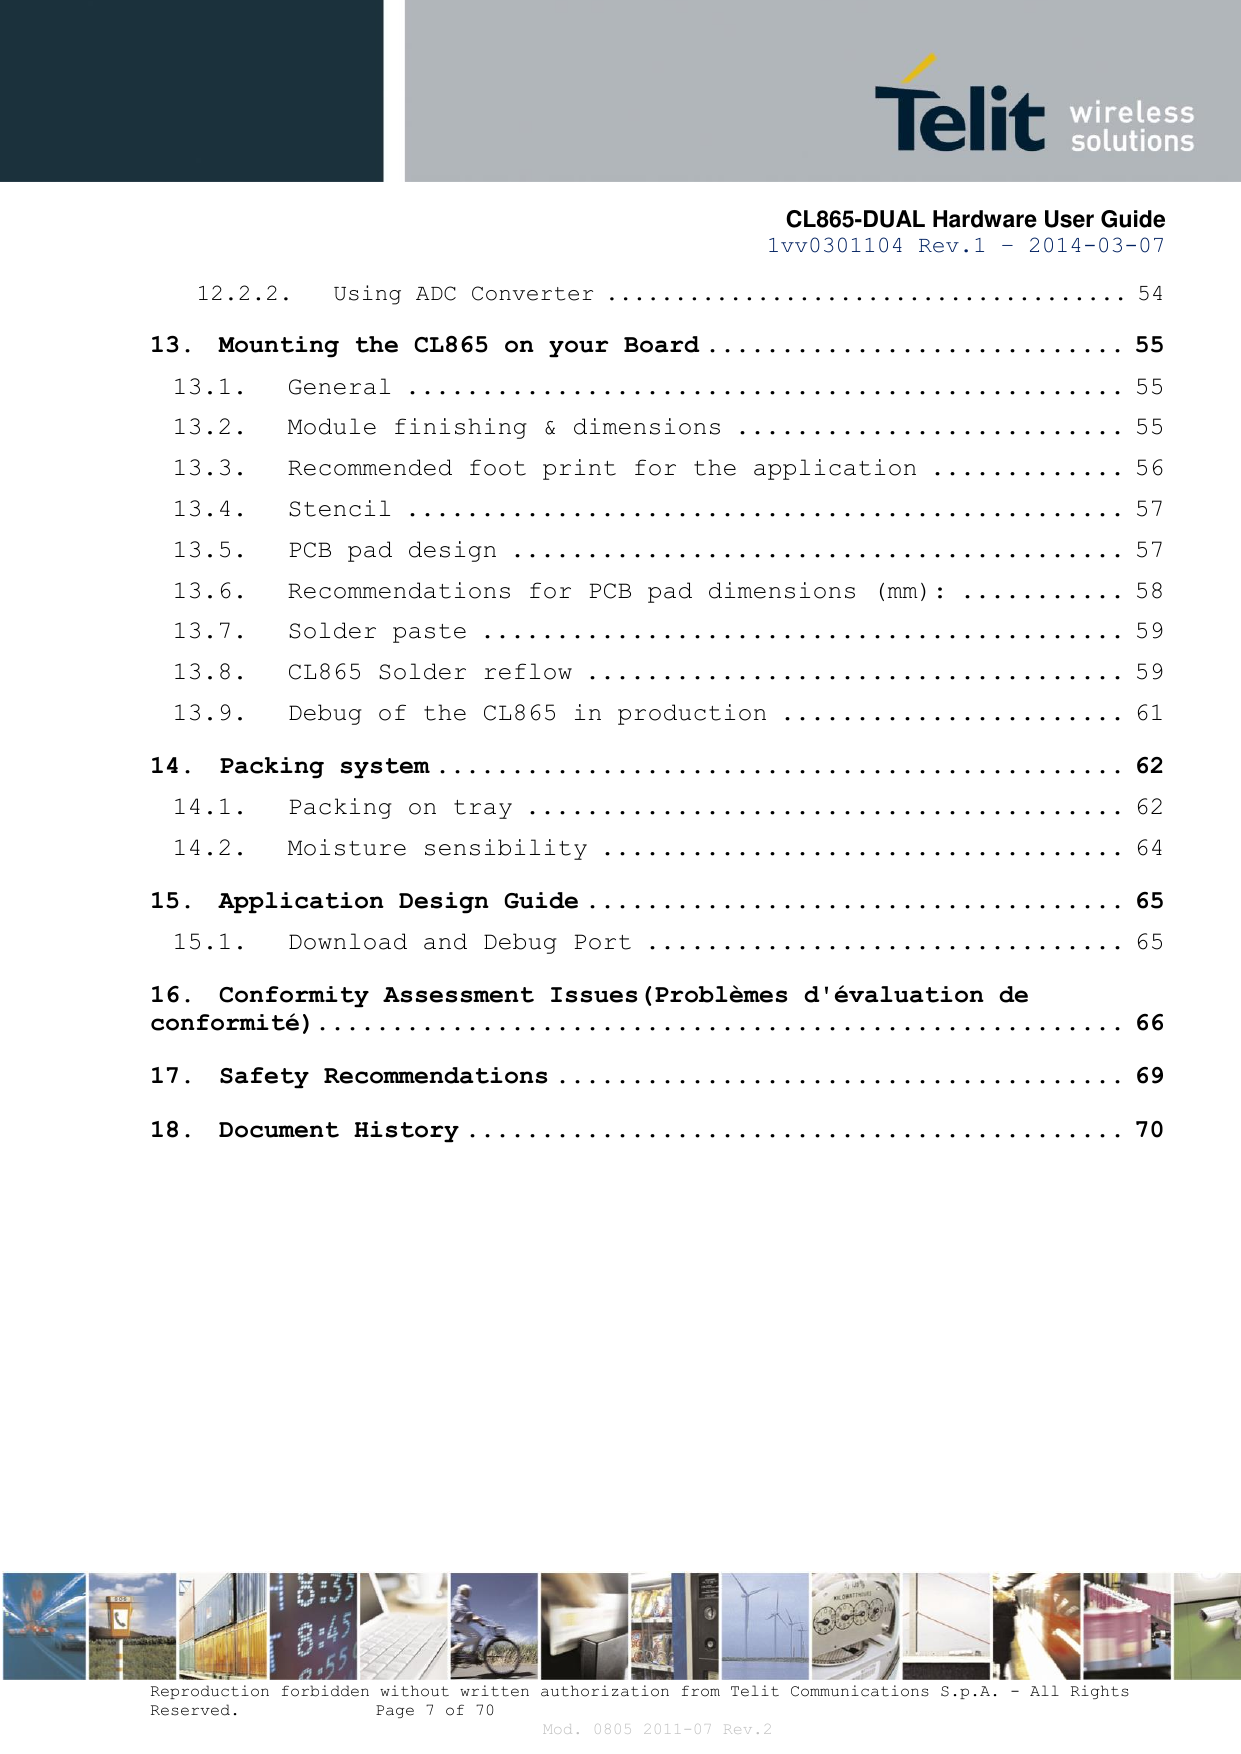       CL865-DUAL Hardware User Guide 1vv0301104 Rev.1 – 2014-03-07  Reproduction forbidden without written authorization from Telit Communications S.p.A. - All Rights Reserved.    Page 7 of 70 Mod. 0805 2011-07 Rev.2 12.2.2. Using ADC Converter ...................................... 54 13. Mounting the CL865 on your Board ............................ 55 13.1. General ................................................ 55 13.2. Module finishing &amp; dimensions .......................... 55 13.3. Recommended foot print for the application ............. 56 13.4. Stencil ................................................ 57 13.5. PCB pad design ......................................... 57 13.6. Recommendations for PCB pad dimensions (mm): ........... 58 13.7. Solder paste ........................................... 59 13.8. CL865 Solder reflow .................................... 59 13.9. Debug of the CL865 in production ....................... 61 14. Packing system .............................................. 62 14.1. Packing on tray ........................................ 62 14.2. Moisture sensibility ................................... 64 15. Application Design Guide .................................... 65 15.1. Download and Debug Port ................................ 65 16. Conformity Assessment Issues(Problèmes d&apos;évaluation de conformité)...................................................... 66 17. Safety Recommendations ...................................... 69 18. Document History ............................................ 70  